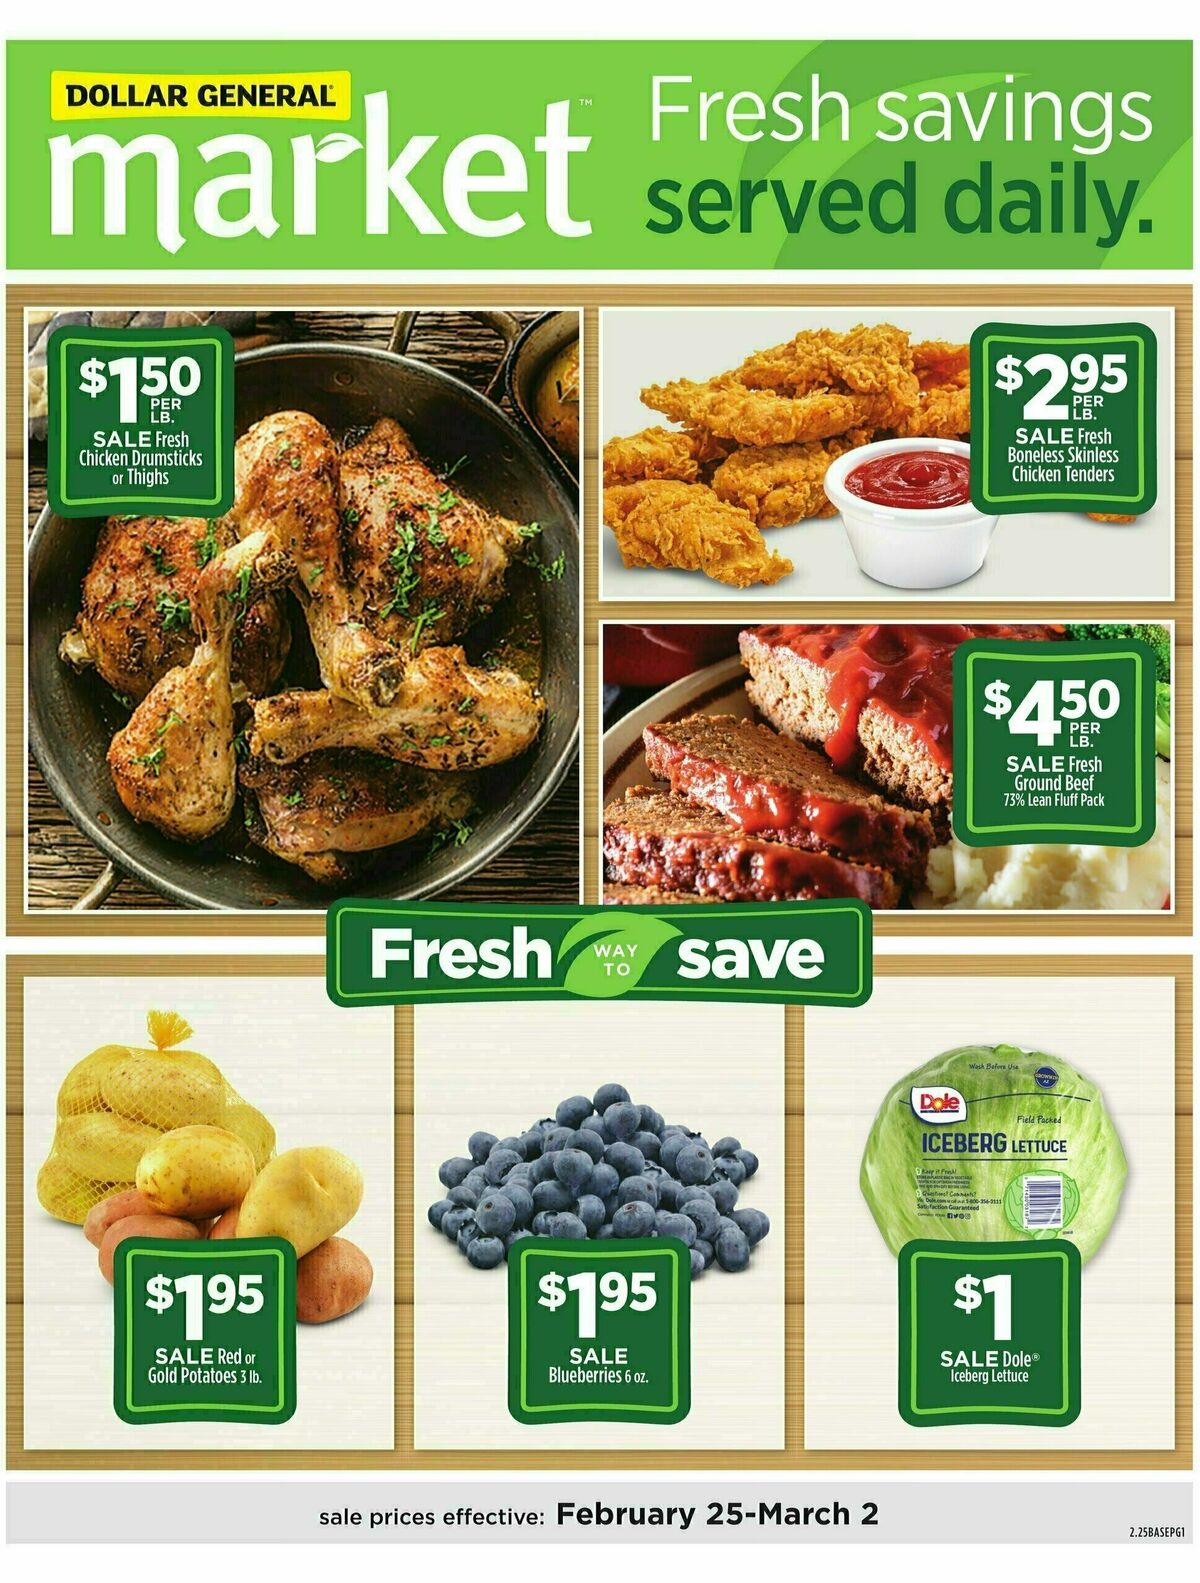 Dollar General Market Ad Weekly Ad from February 25